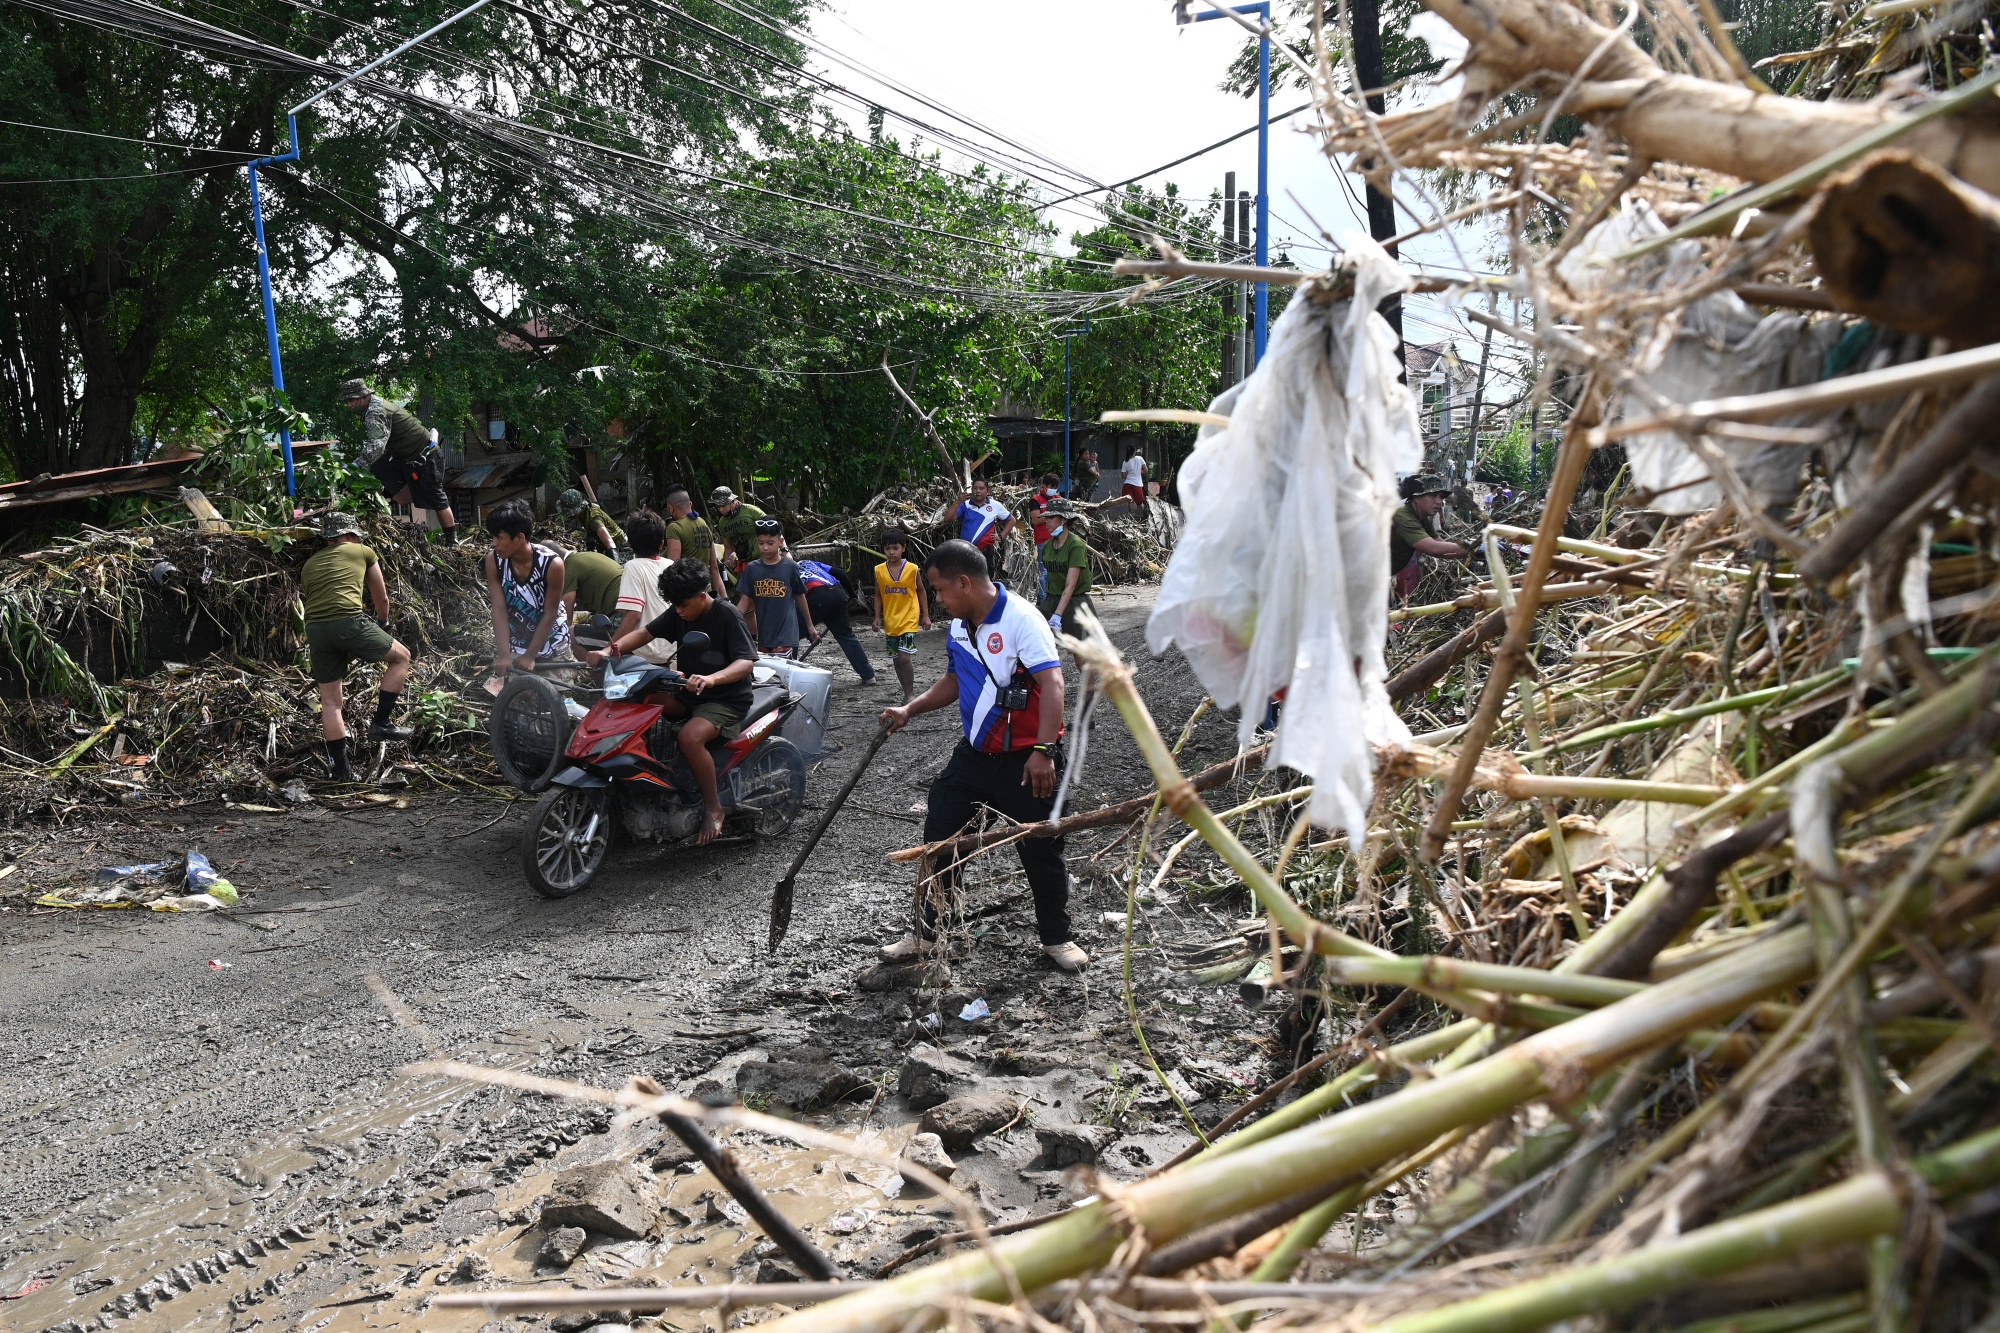 Debris washed on the side of a road in Cavite province, after Tropical Storm Nalgae hit, on Oct. 31.